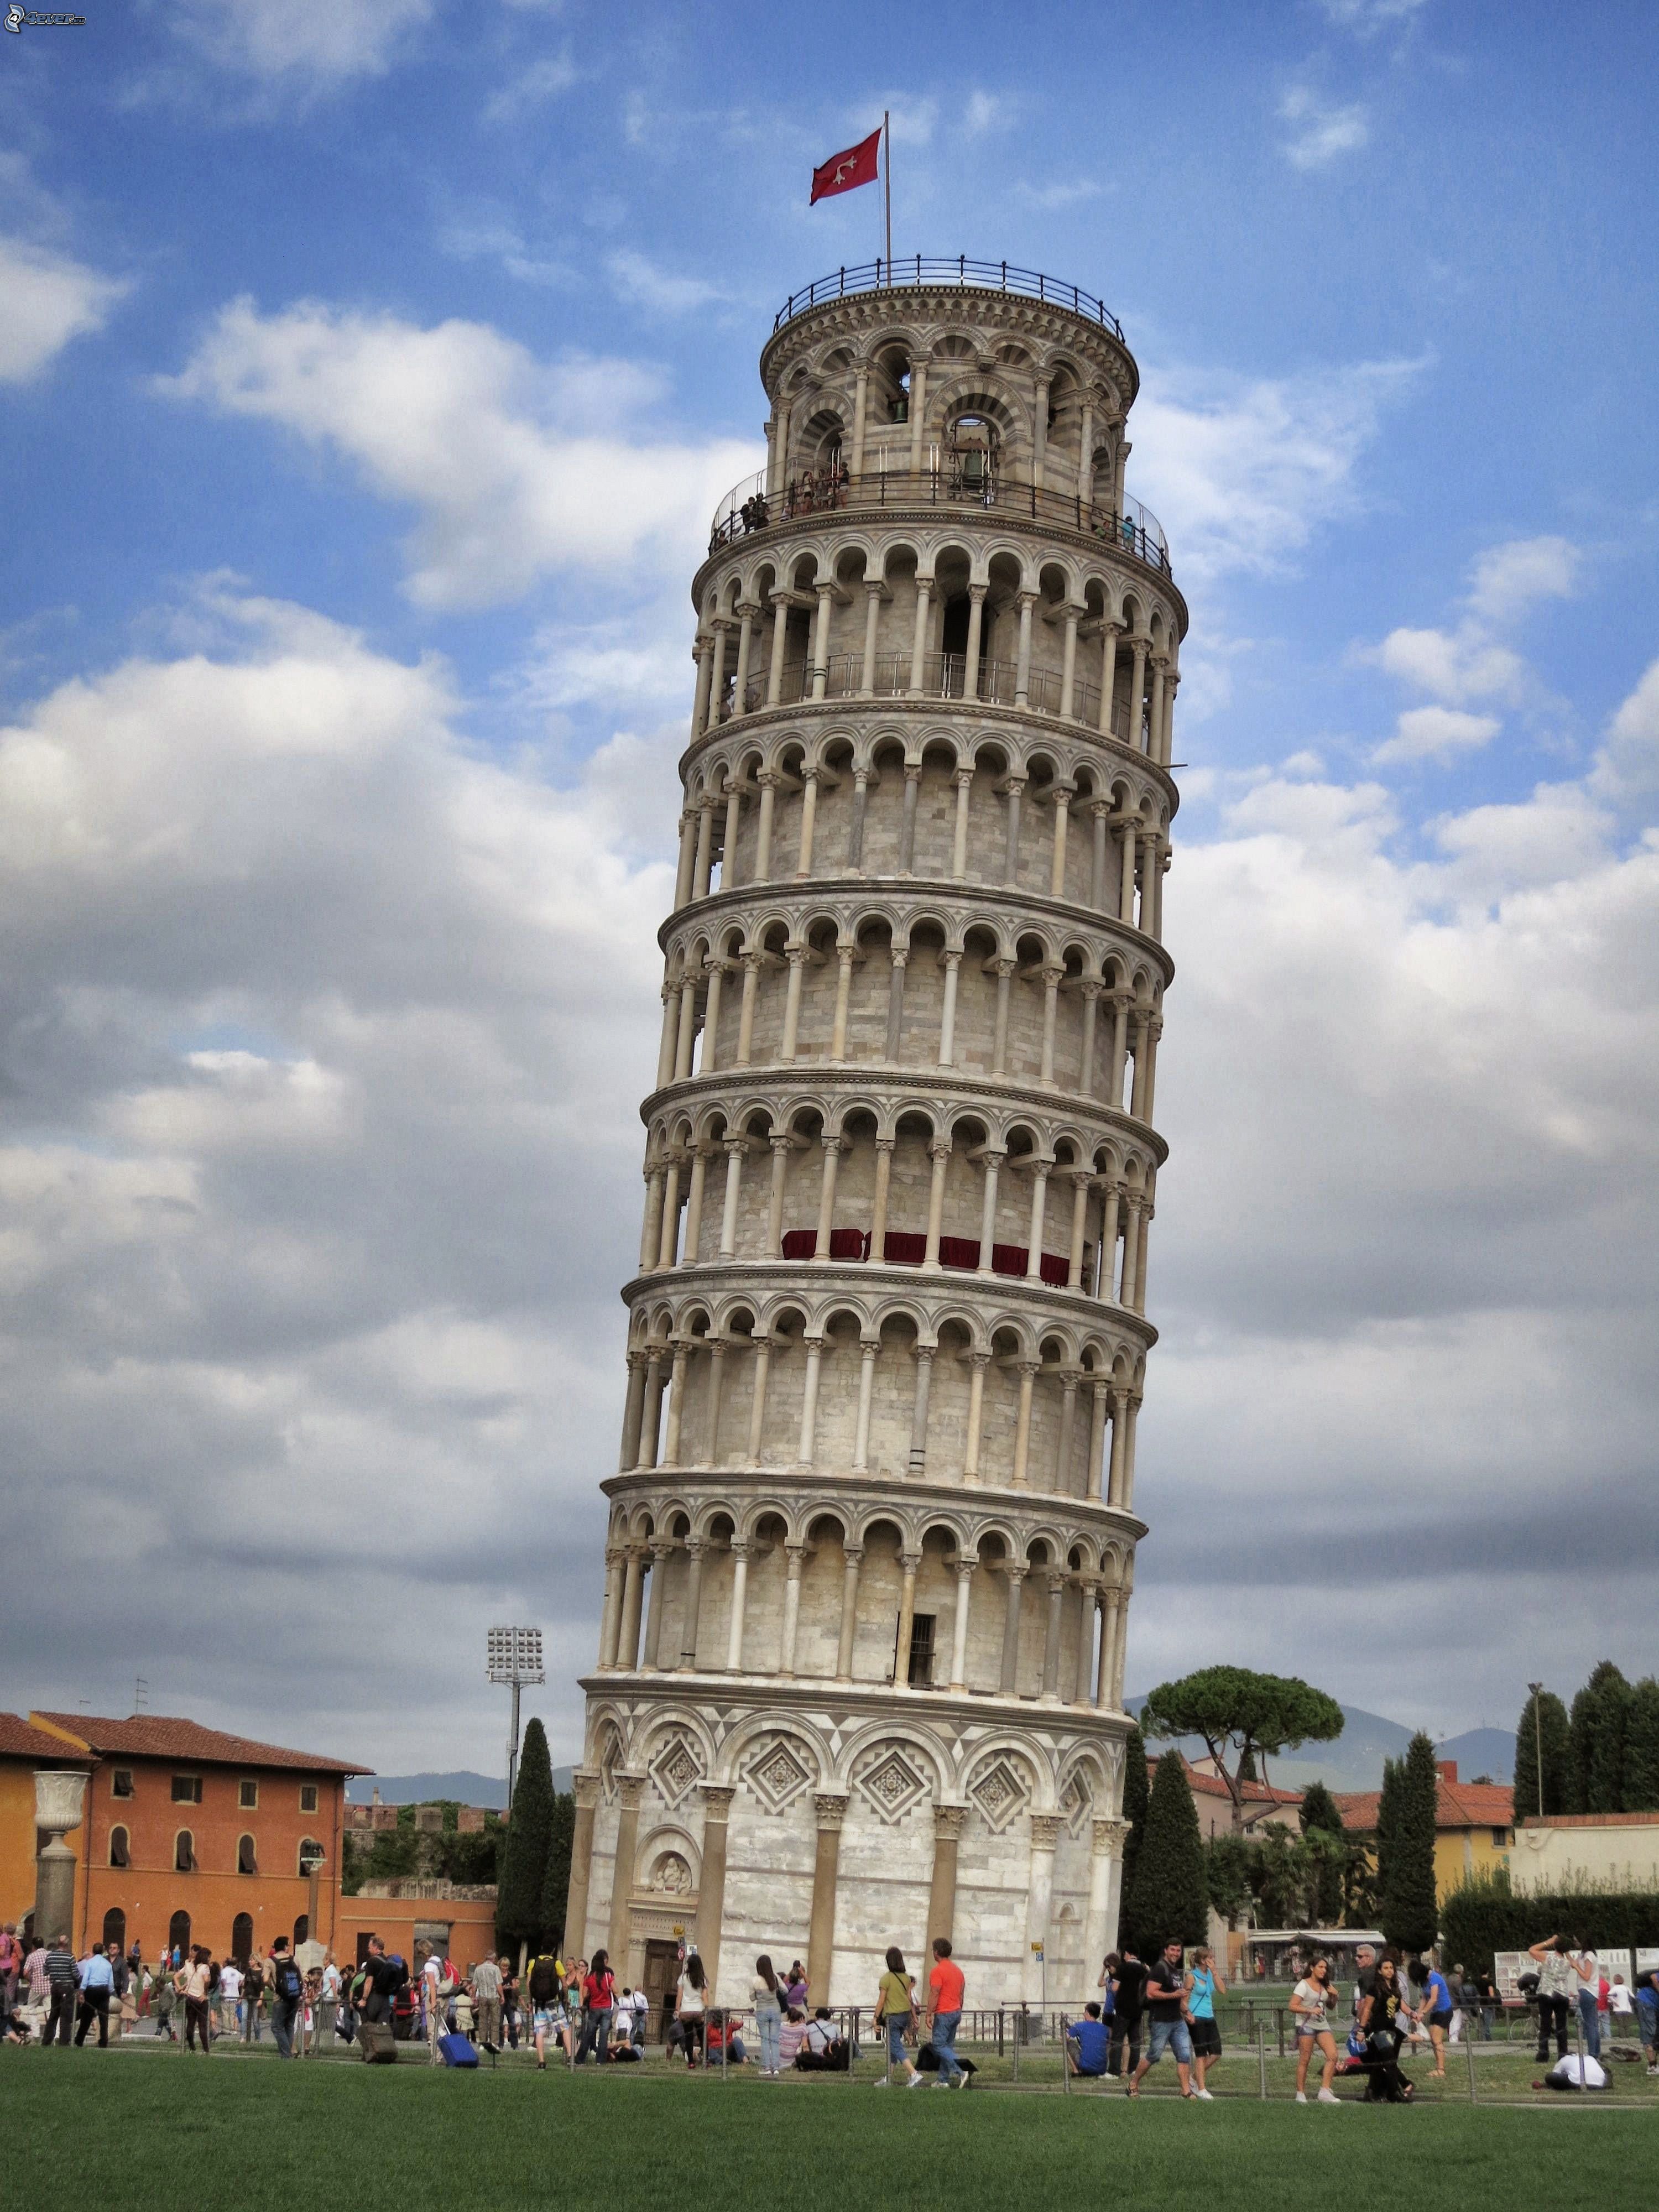 leaning tower of pisa - Google Search | Leaning tower of 